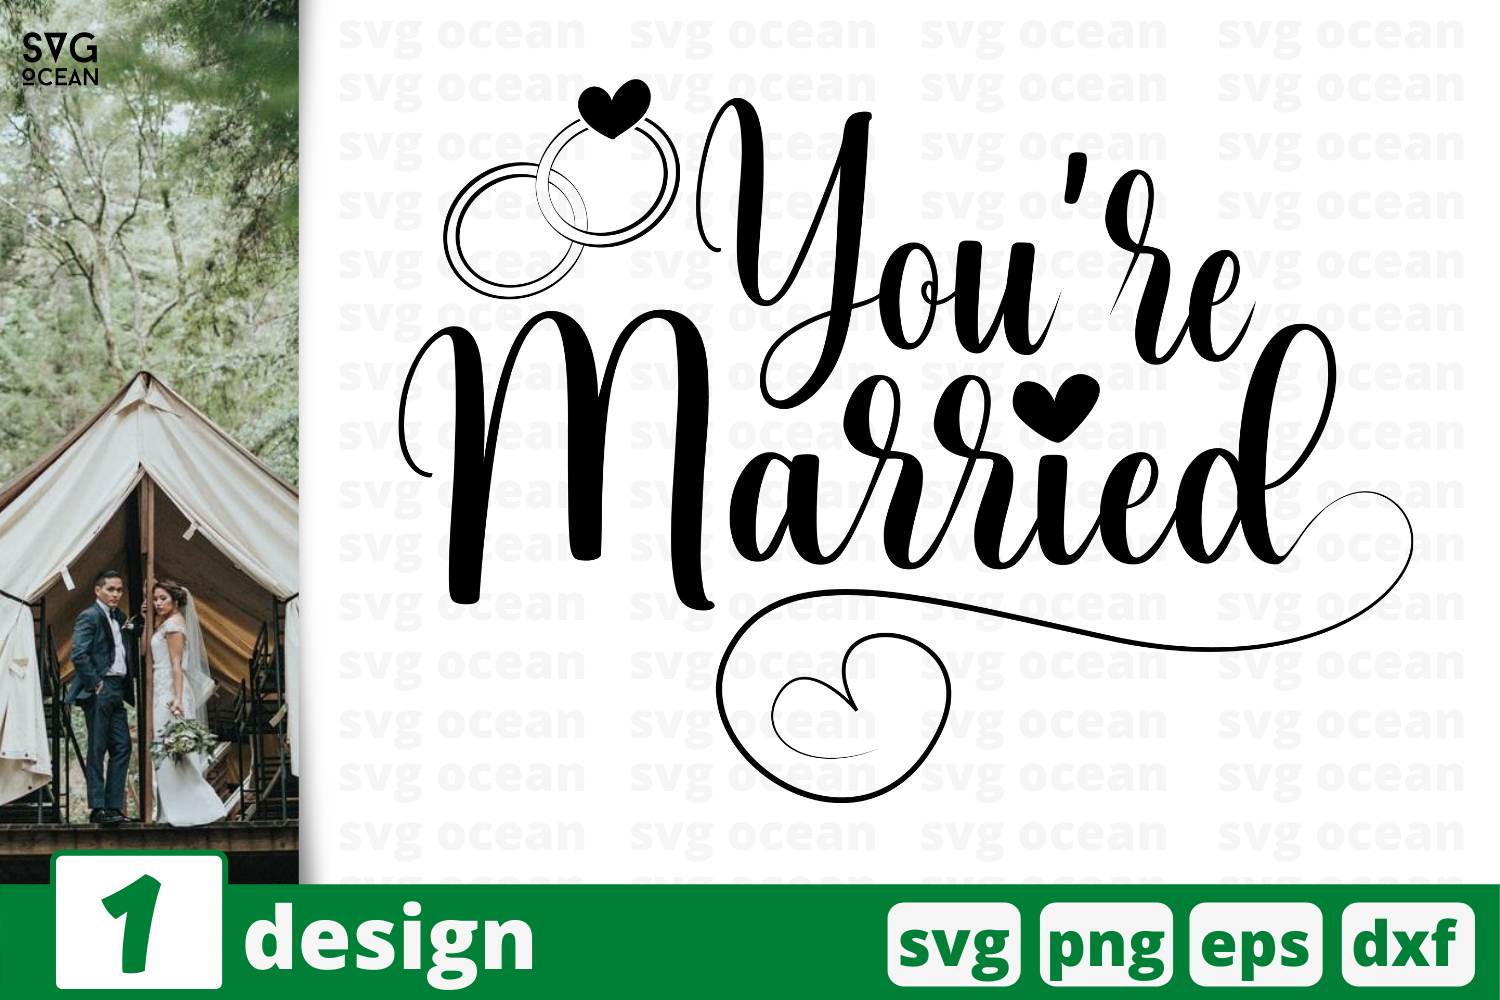 Download 1 YOU'RE MARRIED, wedding quotes cricut svg By SvgOcean ...